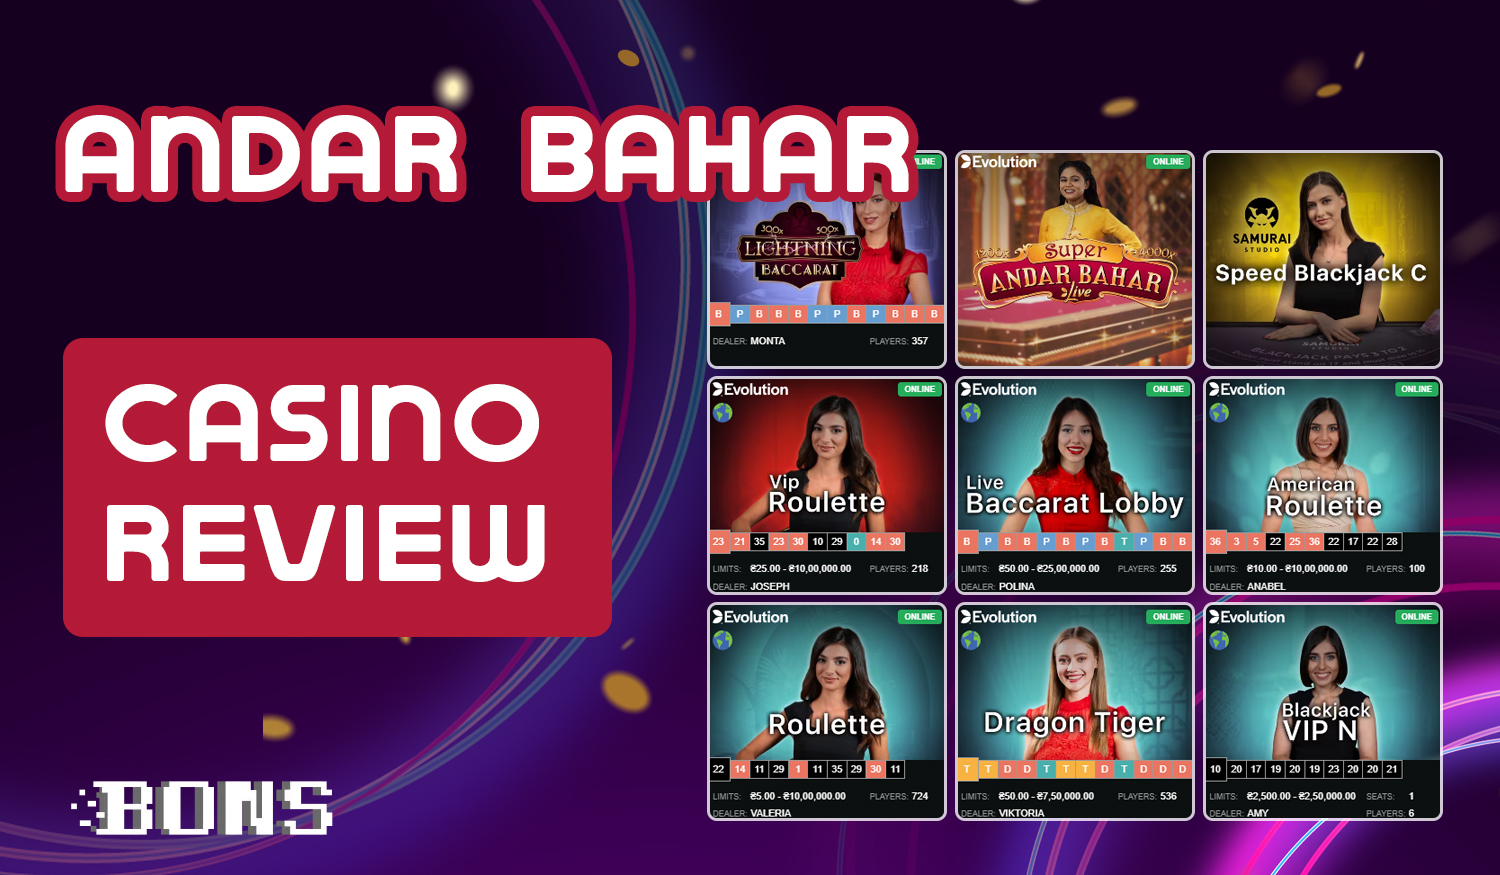 Detailed review of Andar Bahar game at Bons casino: rules and features